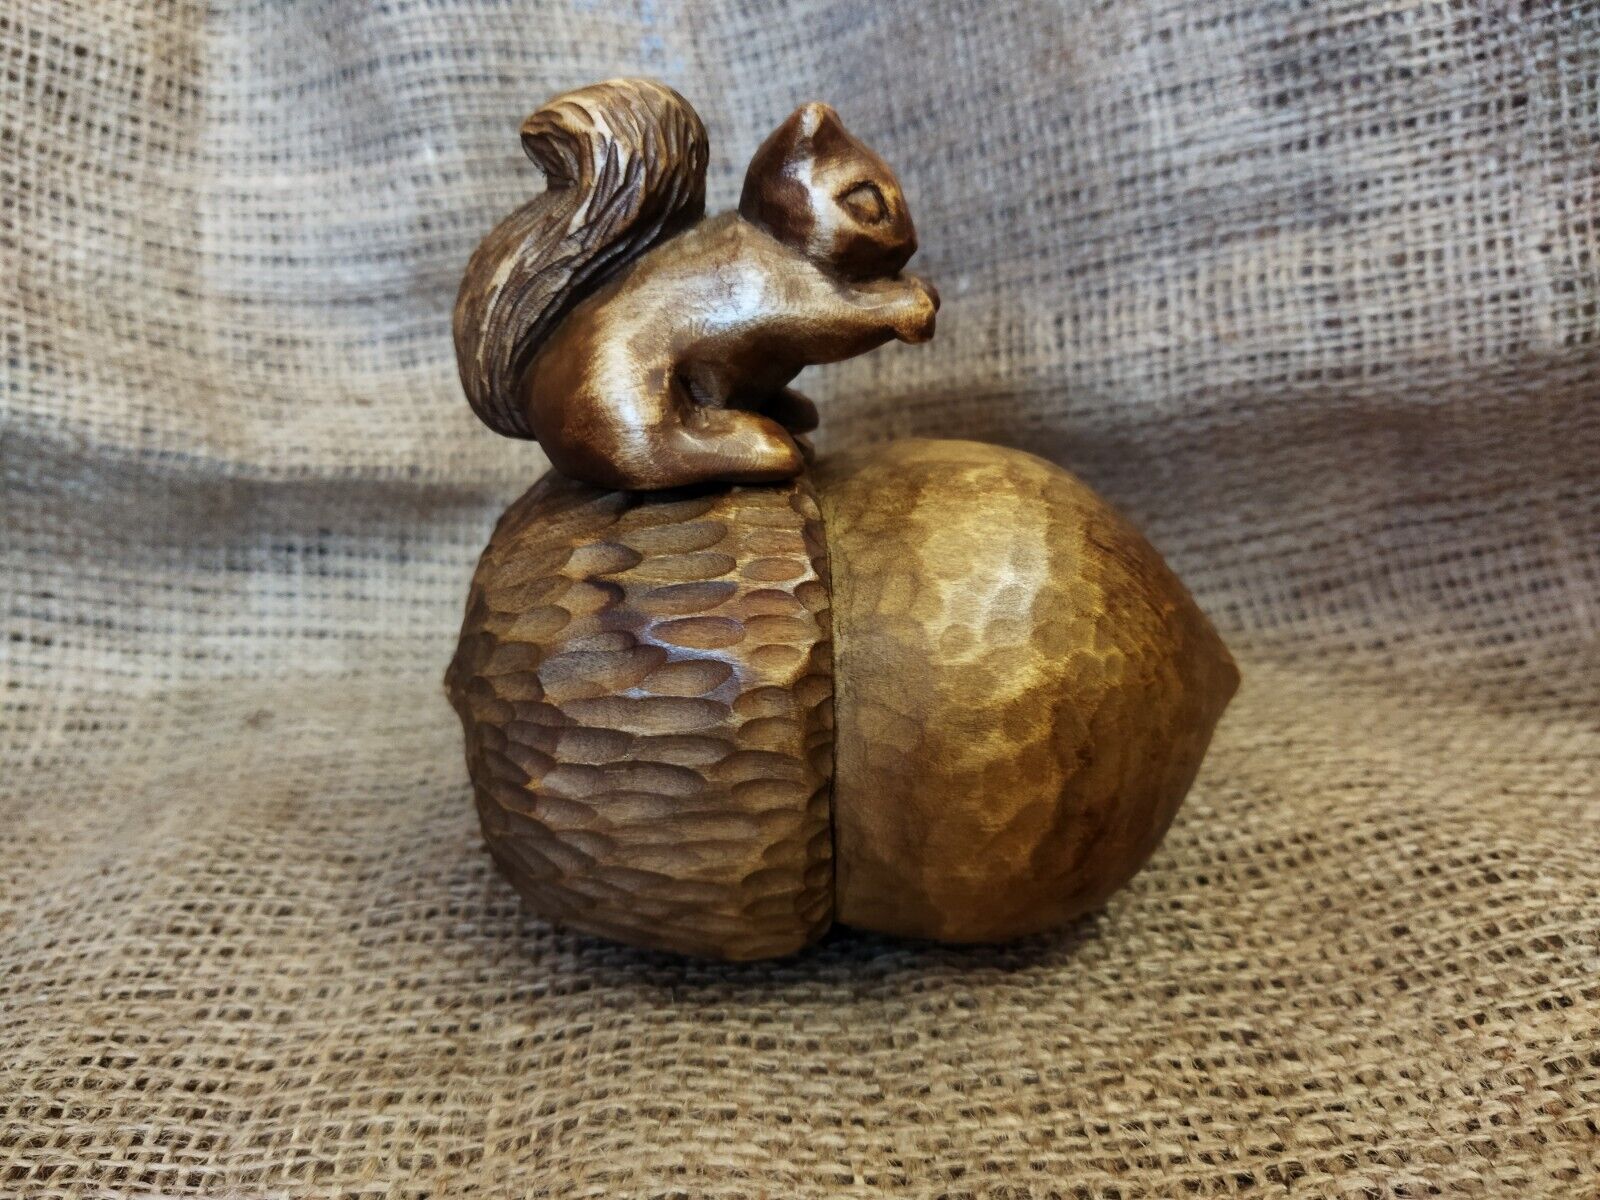 Composition of a squirrel with a wooden acorn. Wood carving. Handmade.